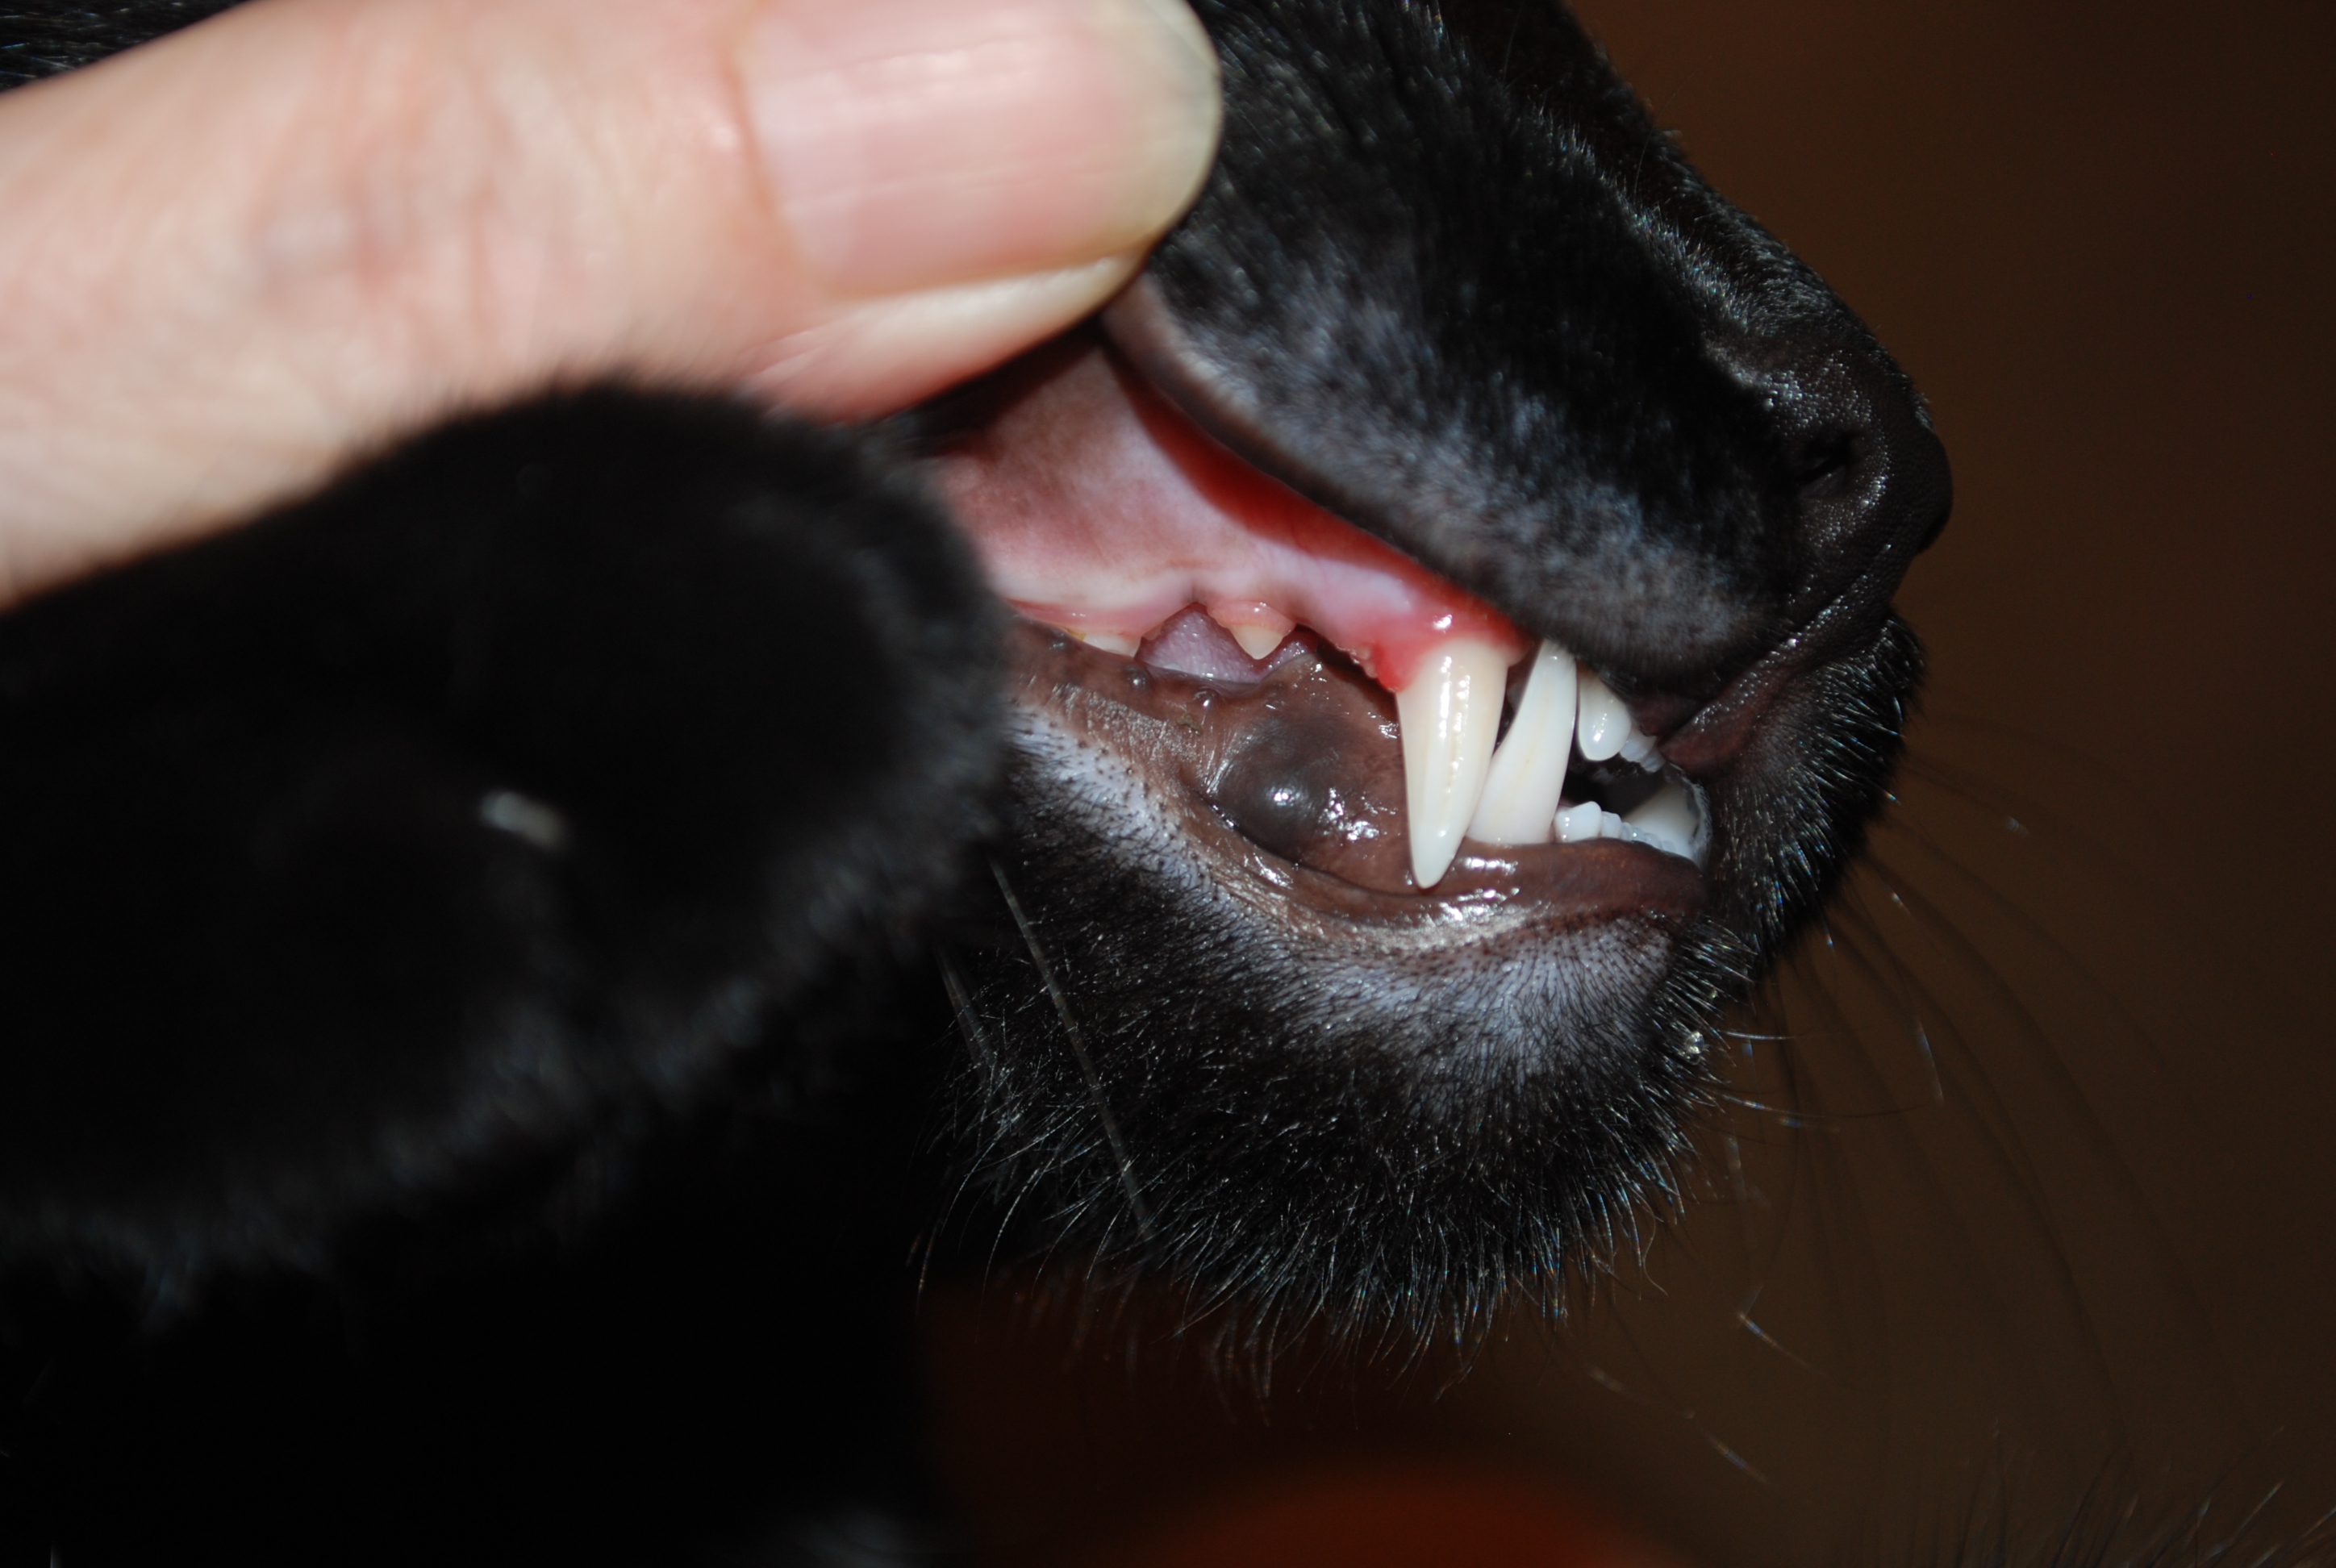 at what age do kittens lose their canine teeth